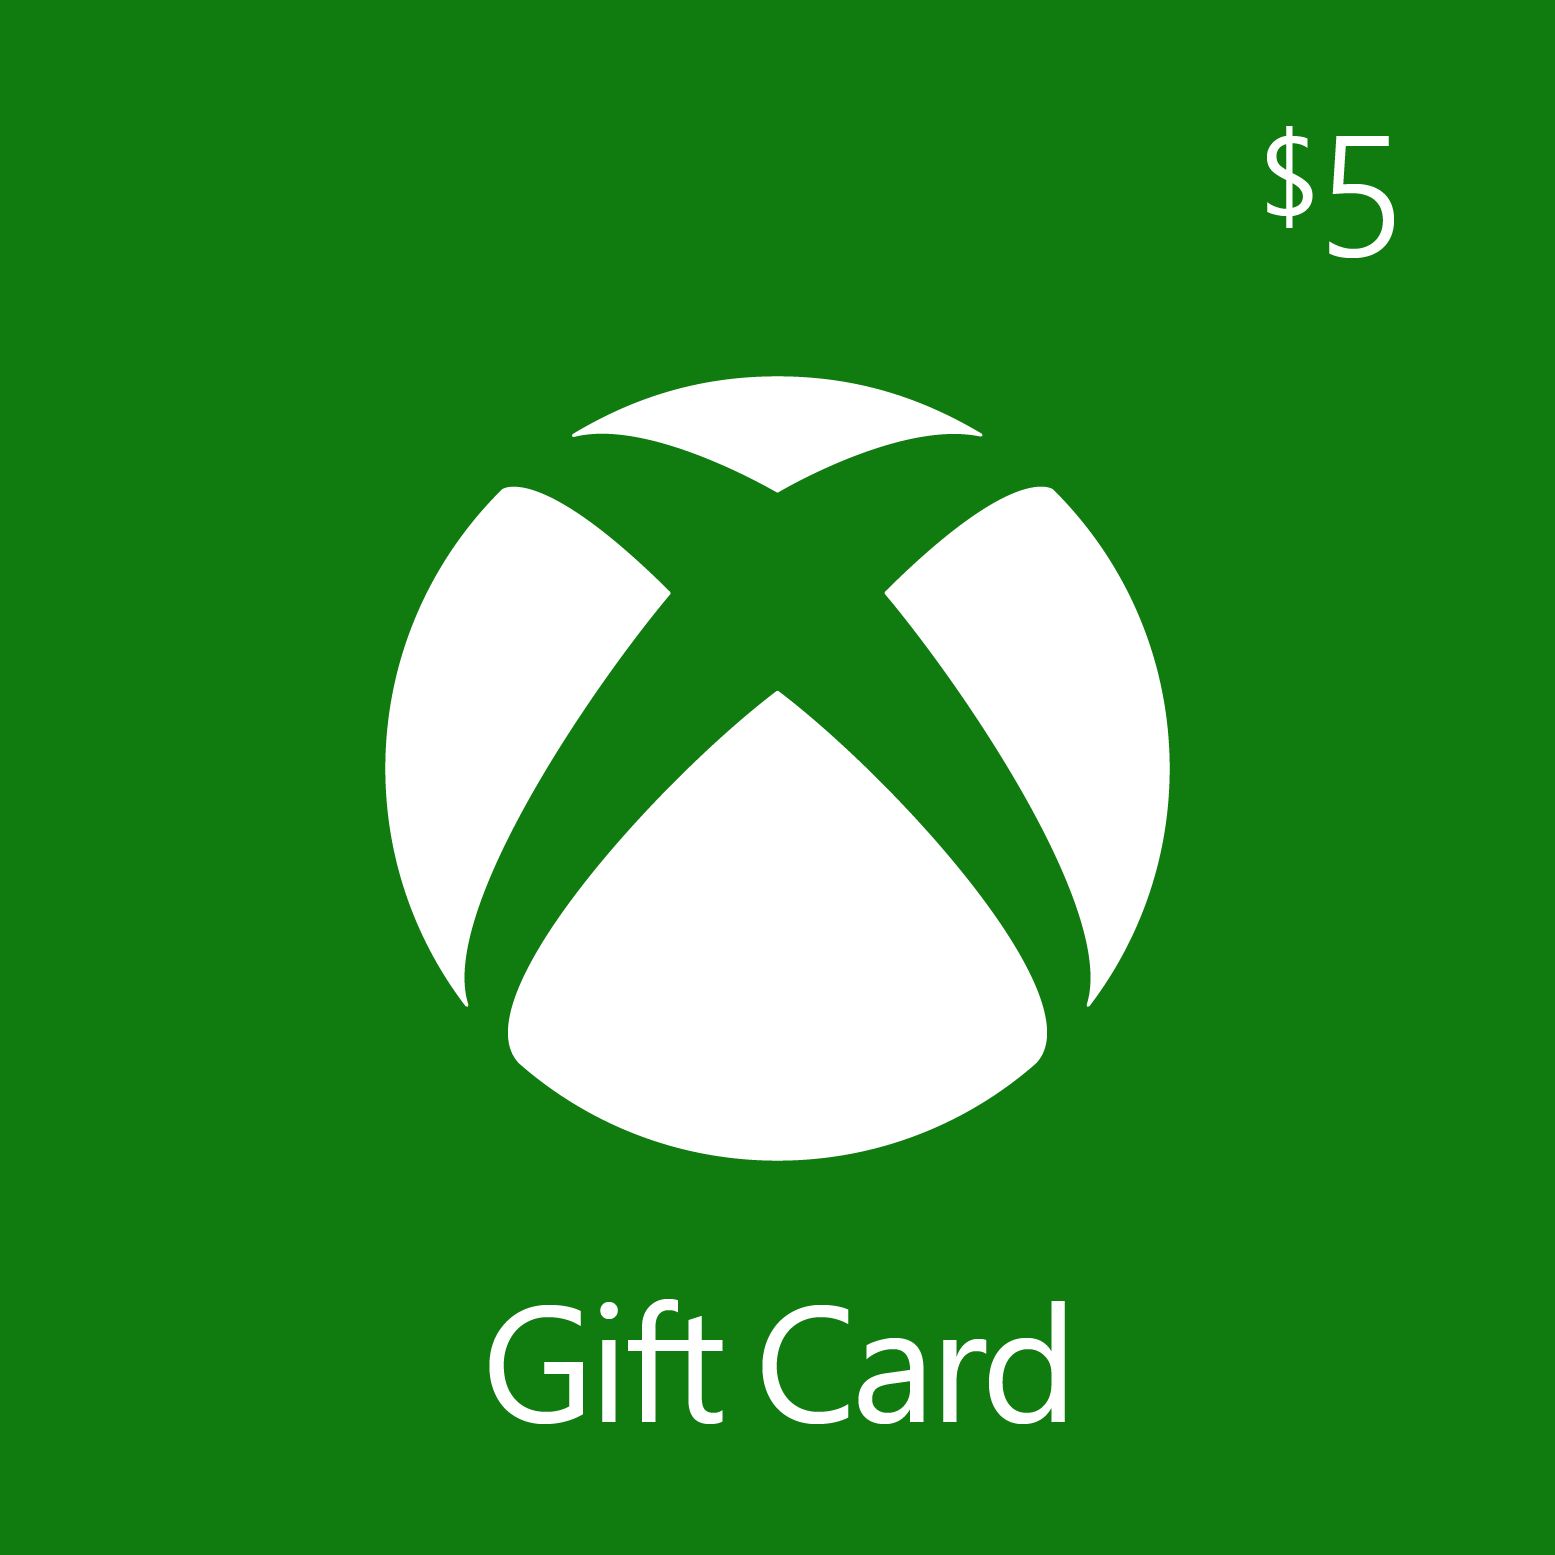 The Xbox Mastercard Is Available Today! A New Way to Earn More